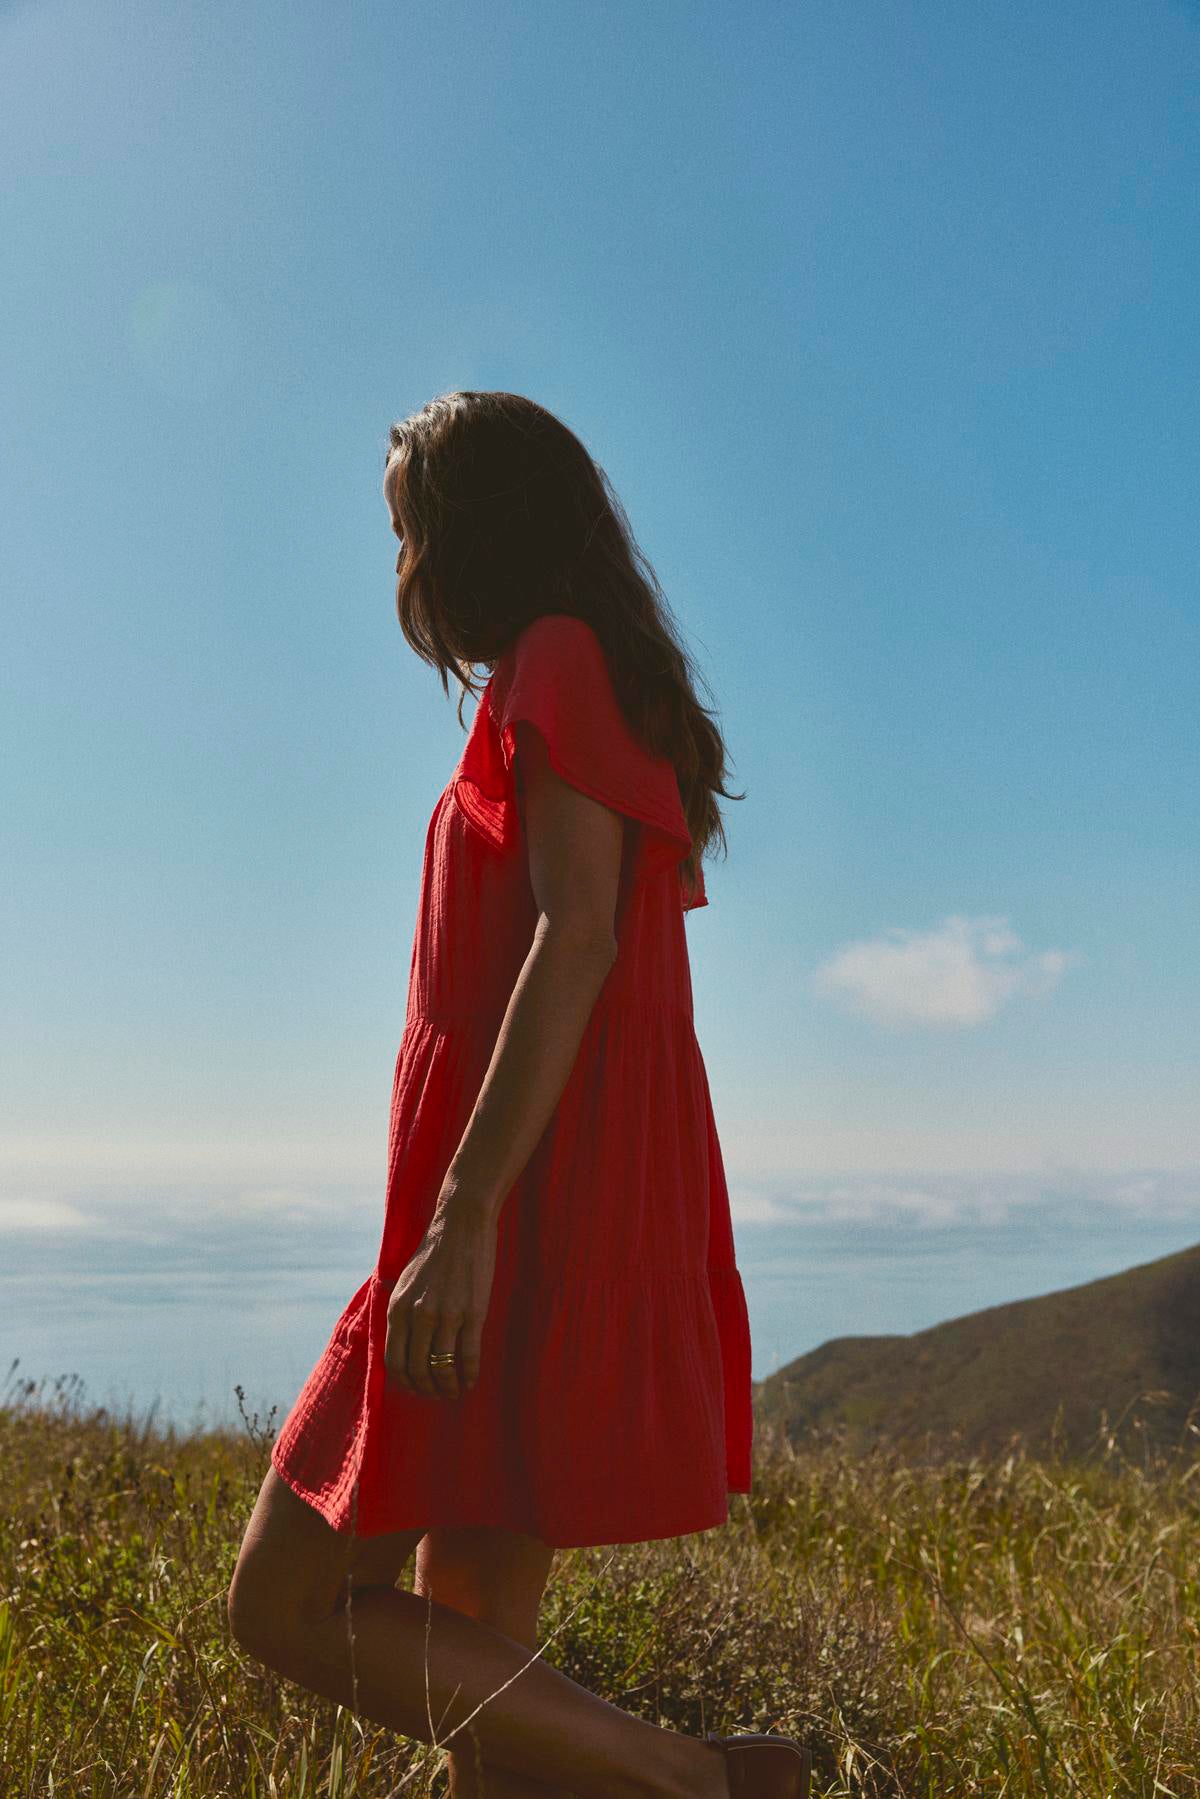 A woman in an ELEANOR COTTON GAUZE TIERED DRESS by Velvet by Graham & Spencer walking through a field with a clear blue sky and hills in the background.-36532828700865